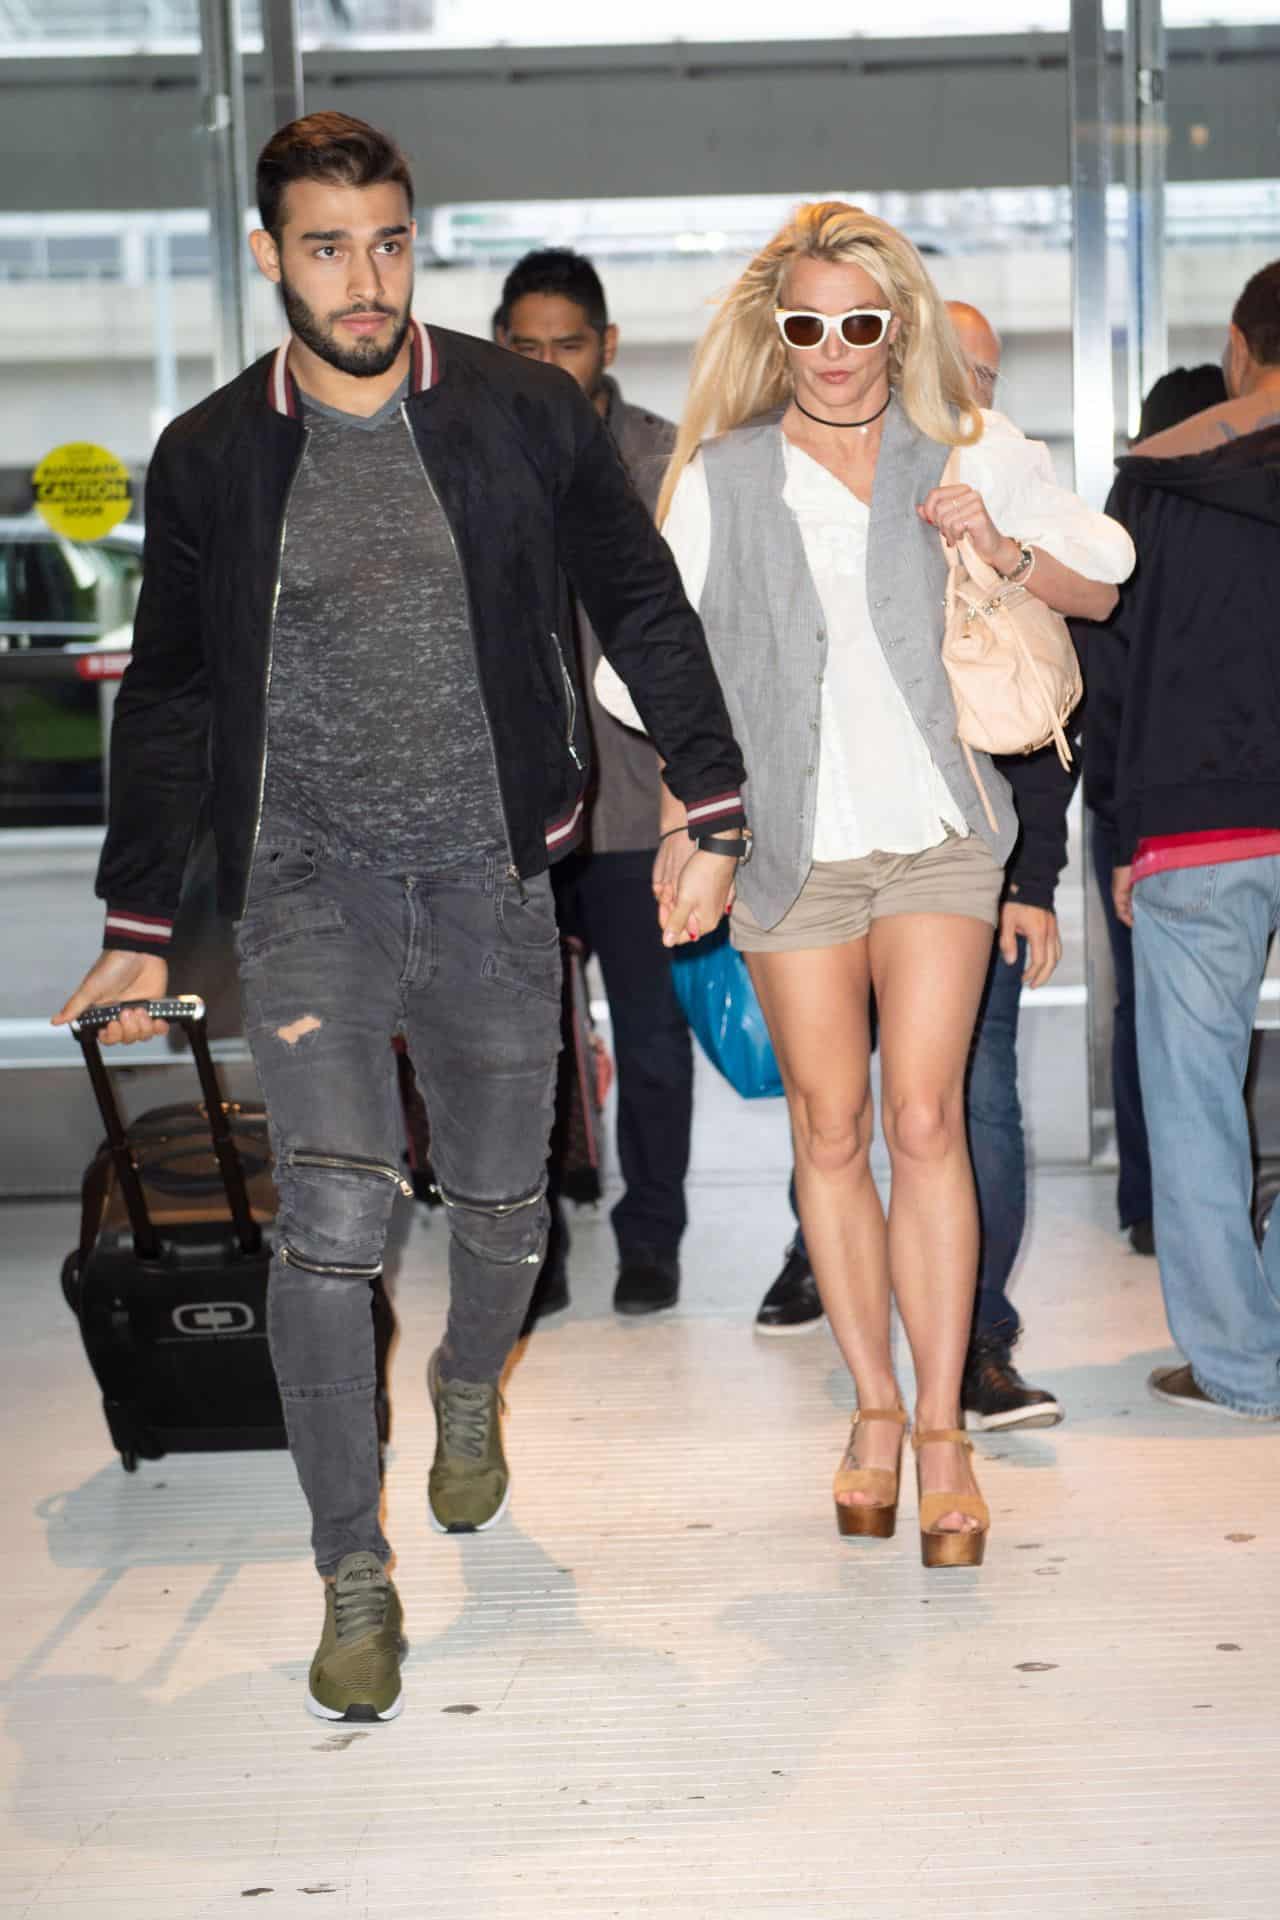 Britney Spears and Husband Sam Asghari Jet Off on a Romantic Getaway